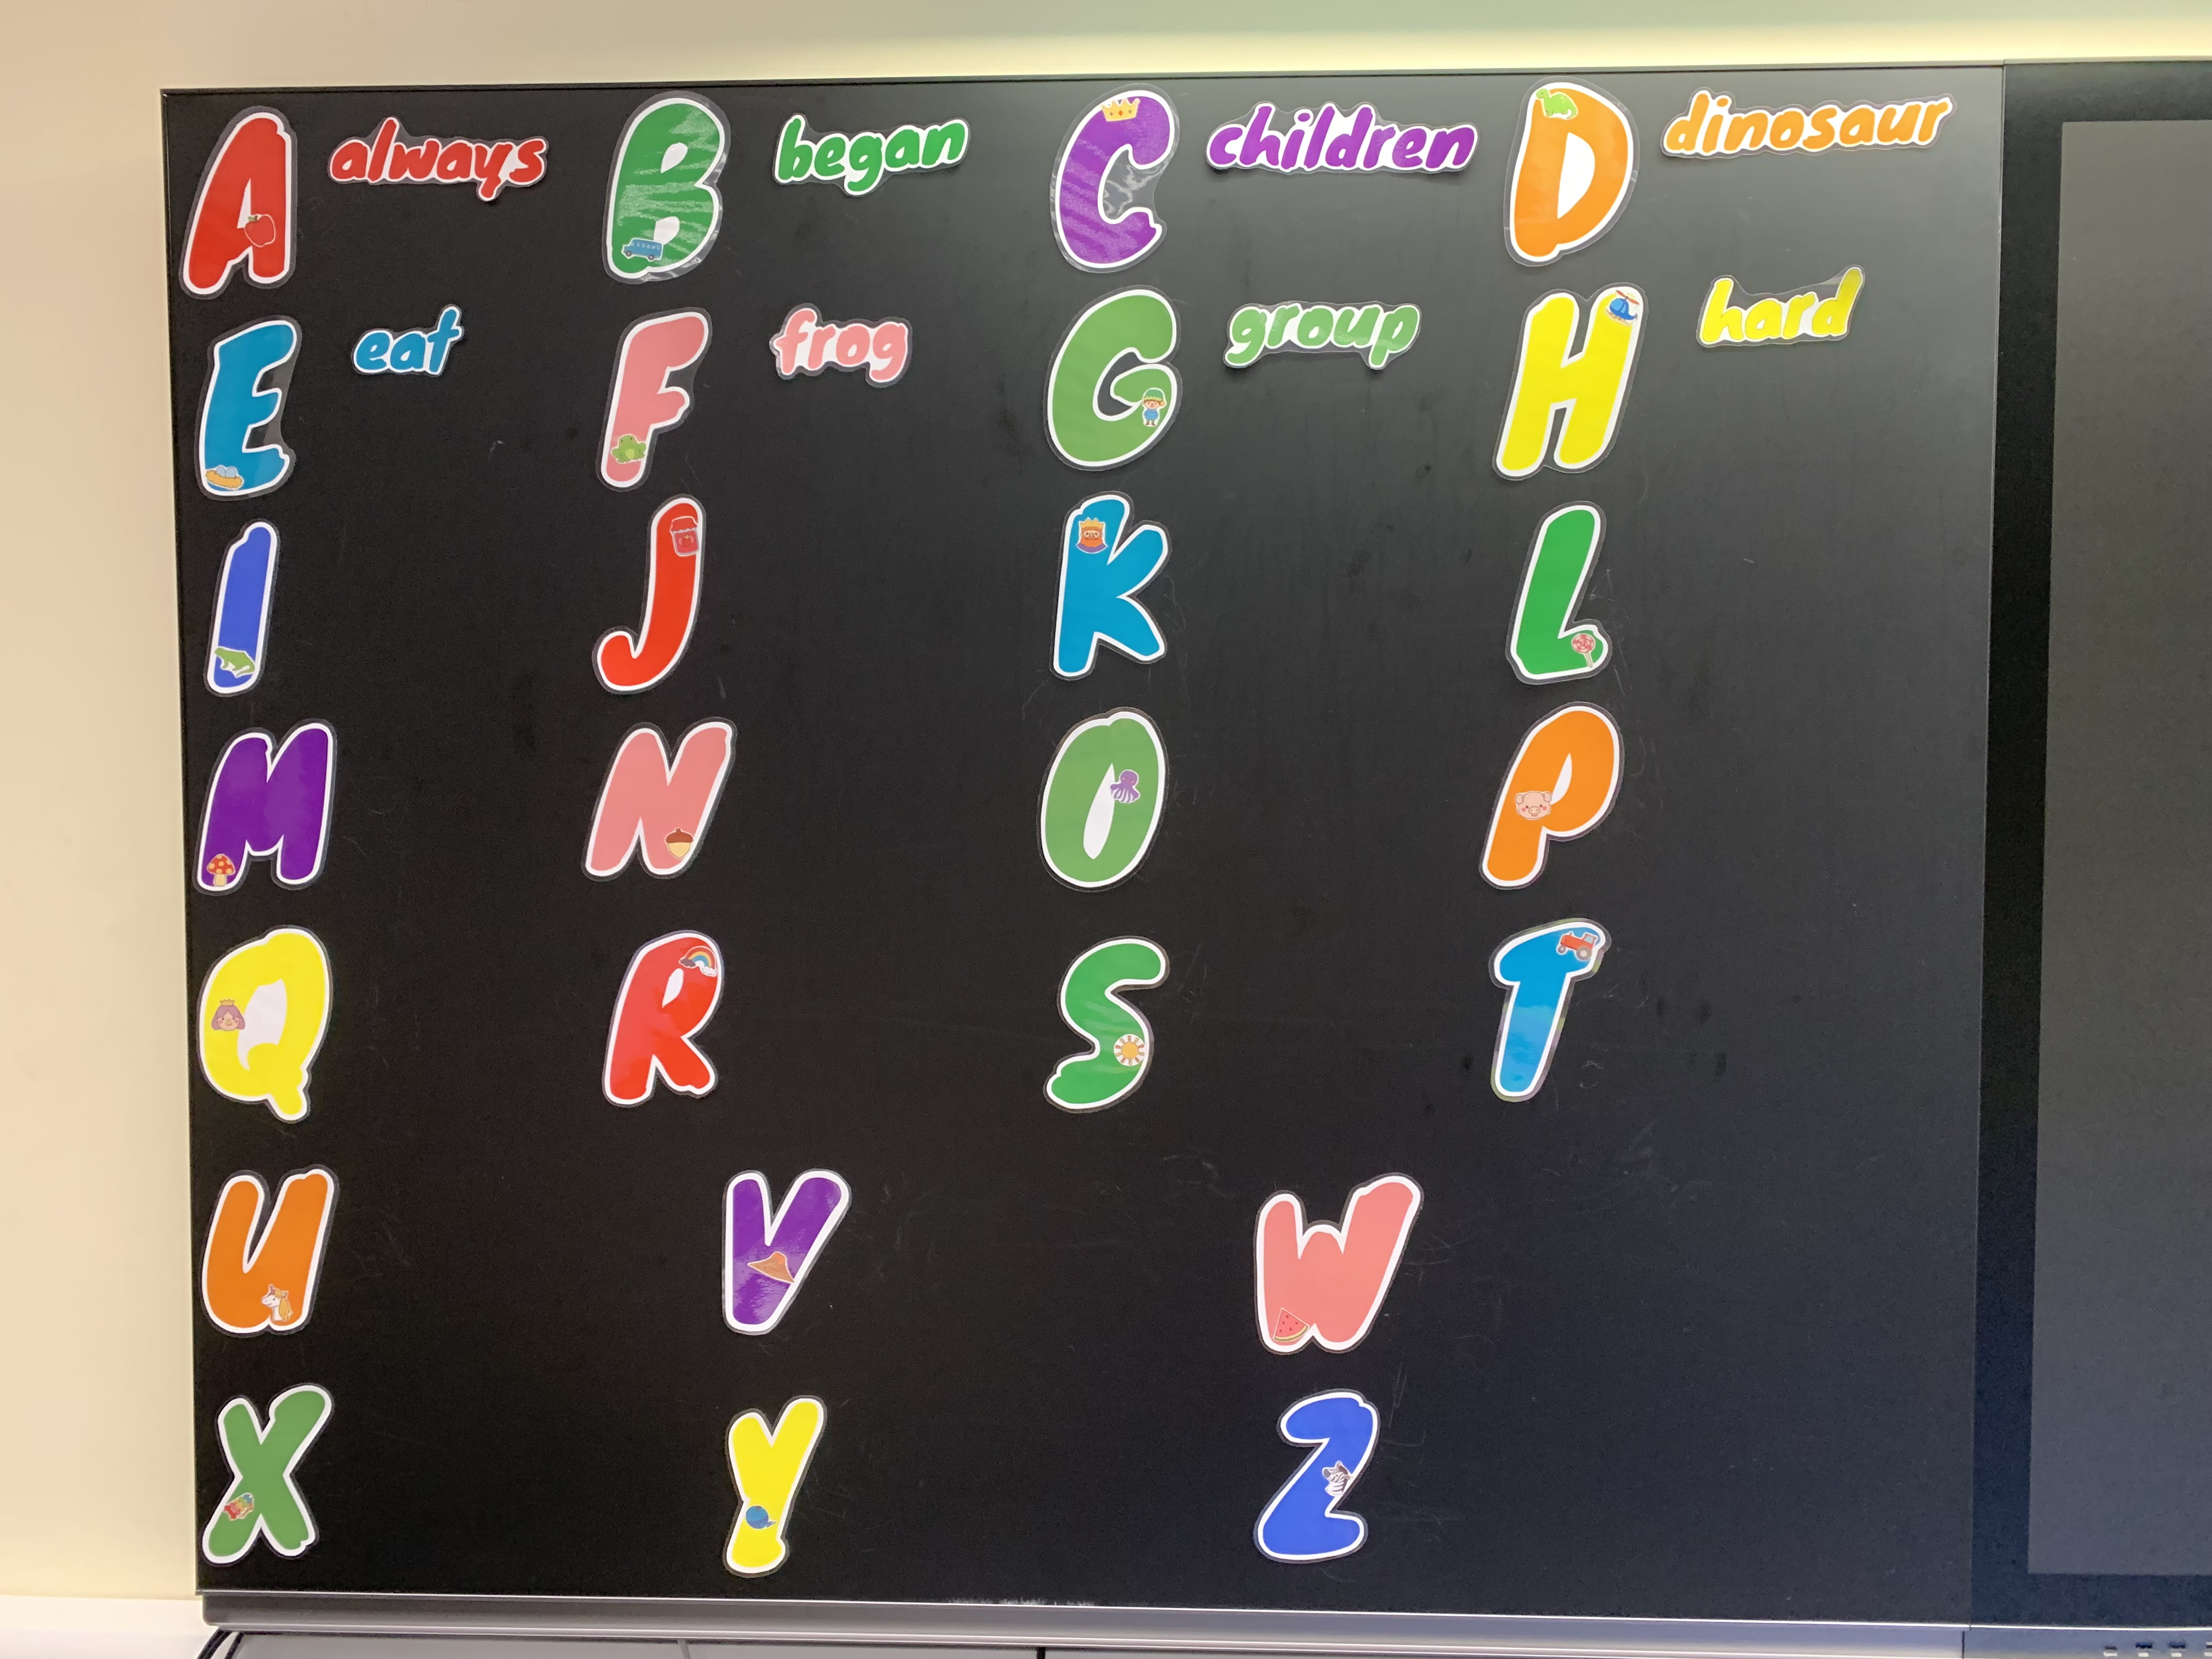 A word wall made for students’ consolidation of their word bank